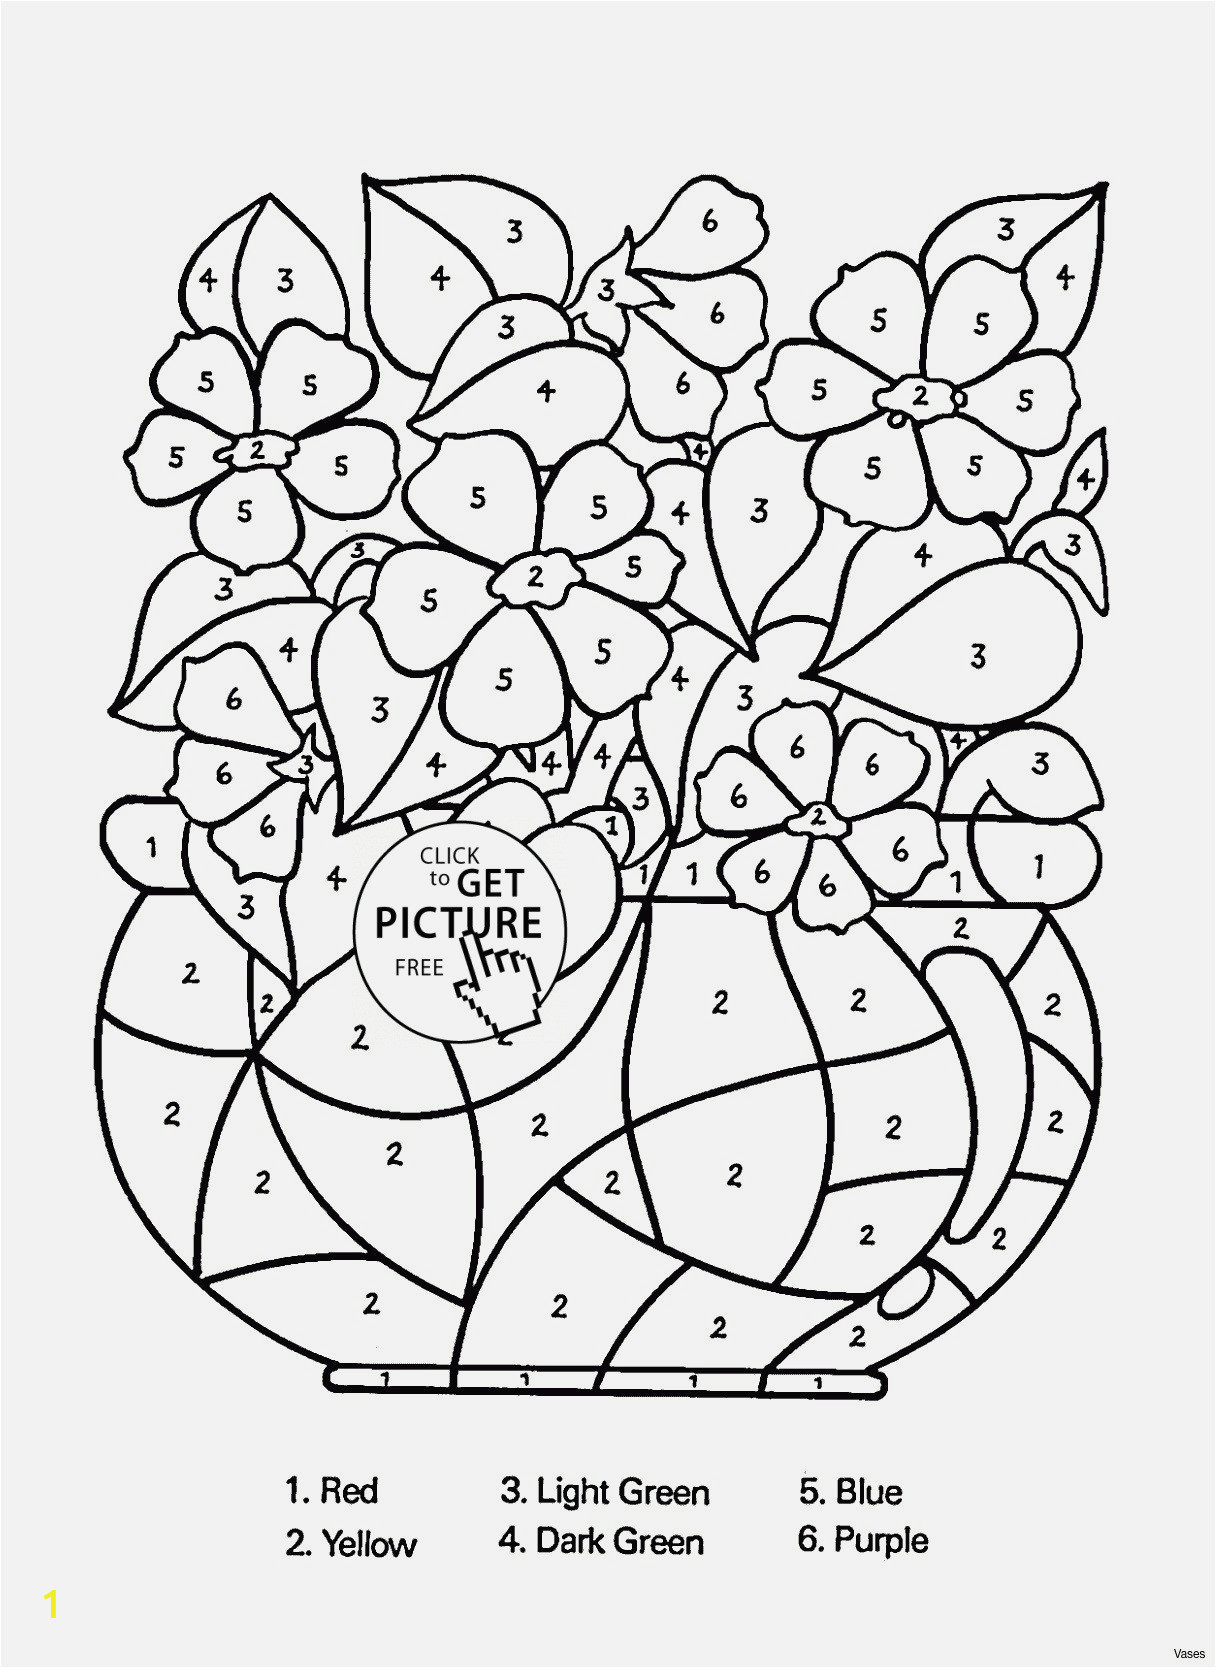 Free Color by Number Halloween Coloring Pages New Coloring Pages Free Bird Unique Parrot Elegant